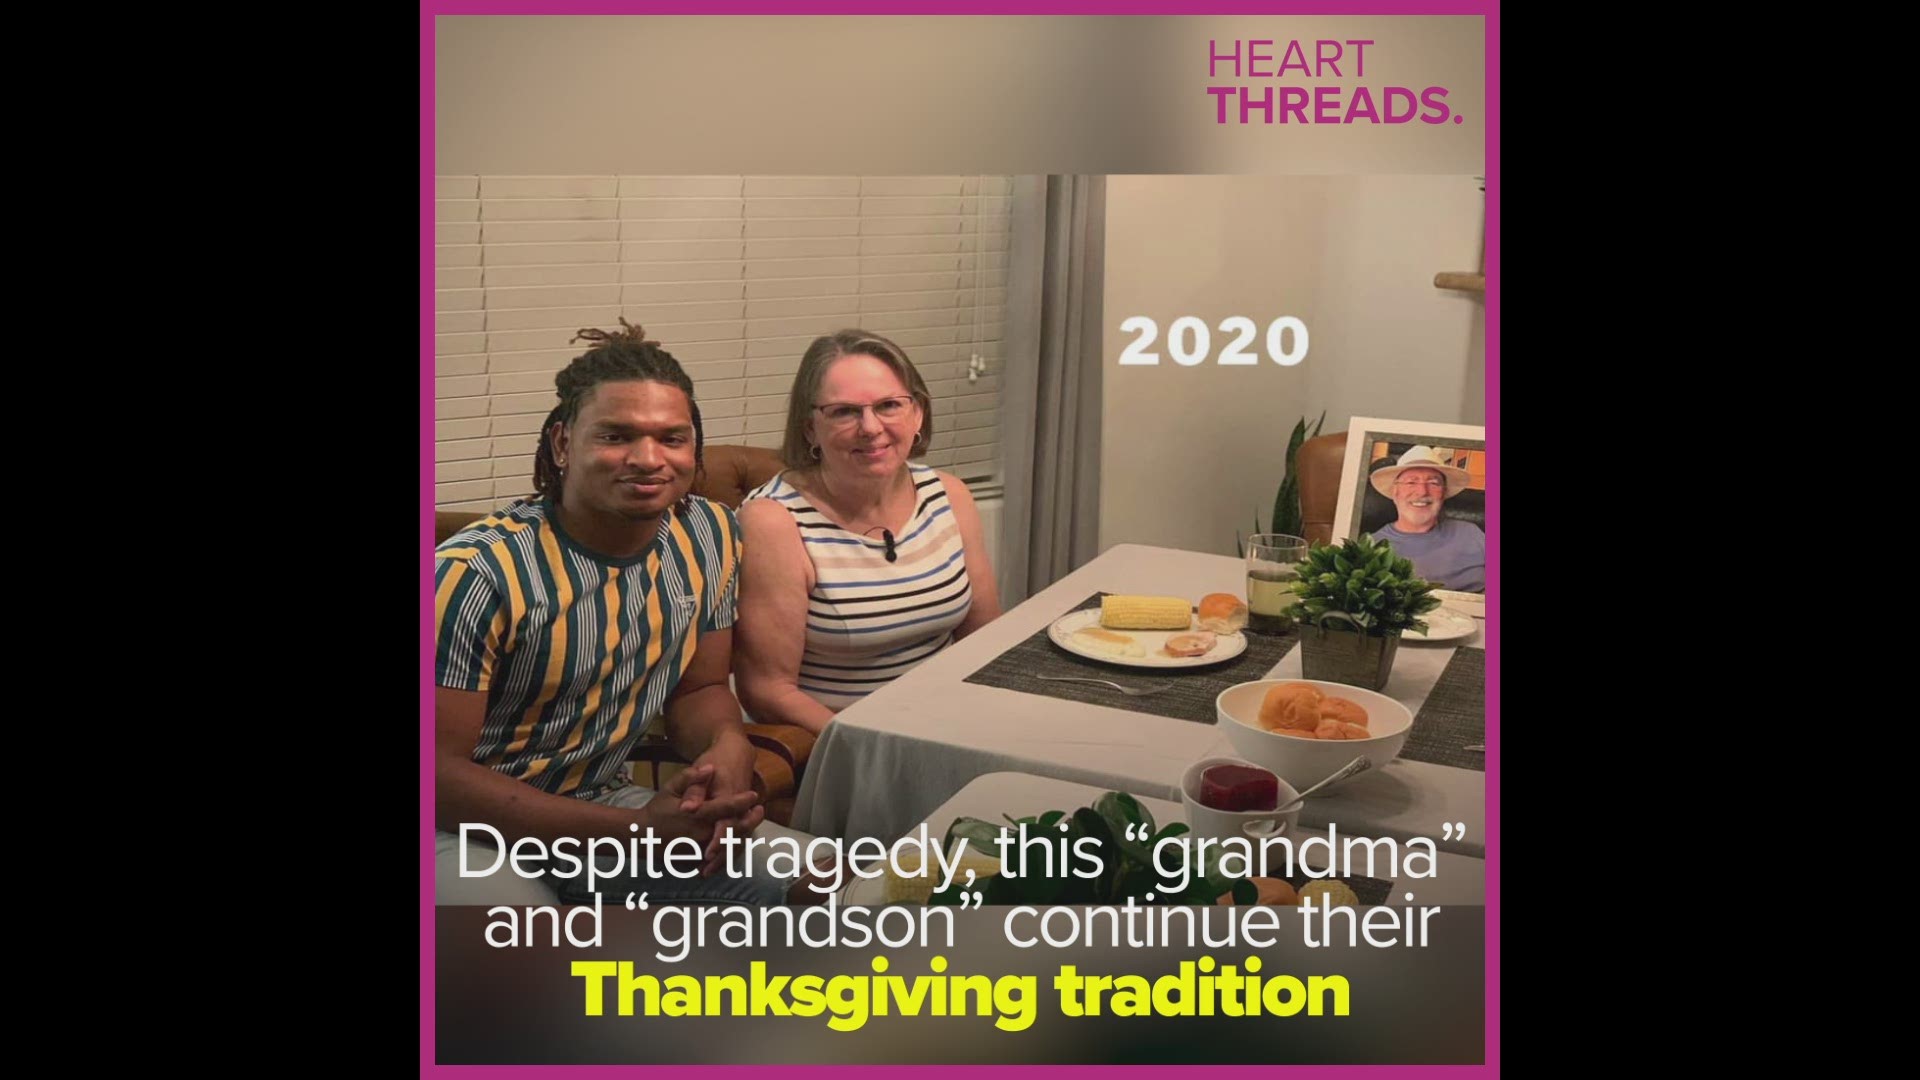 Wanda and Jamal captured America's hearts with their "mistaken" Thanksgiving in 2016 and have continued the tradition ever since.